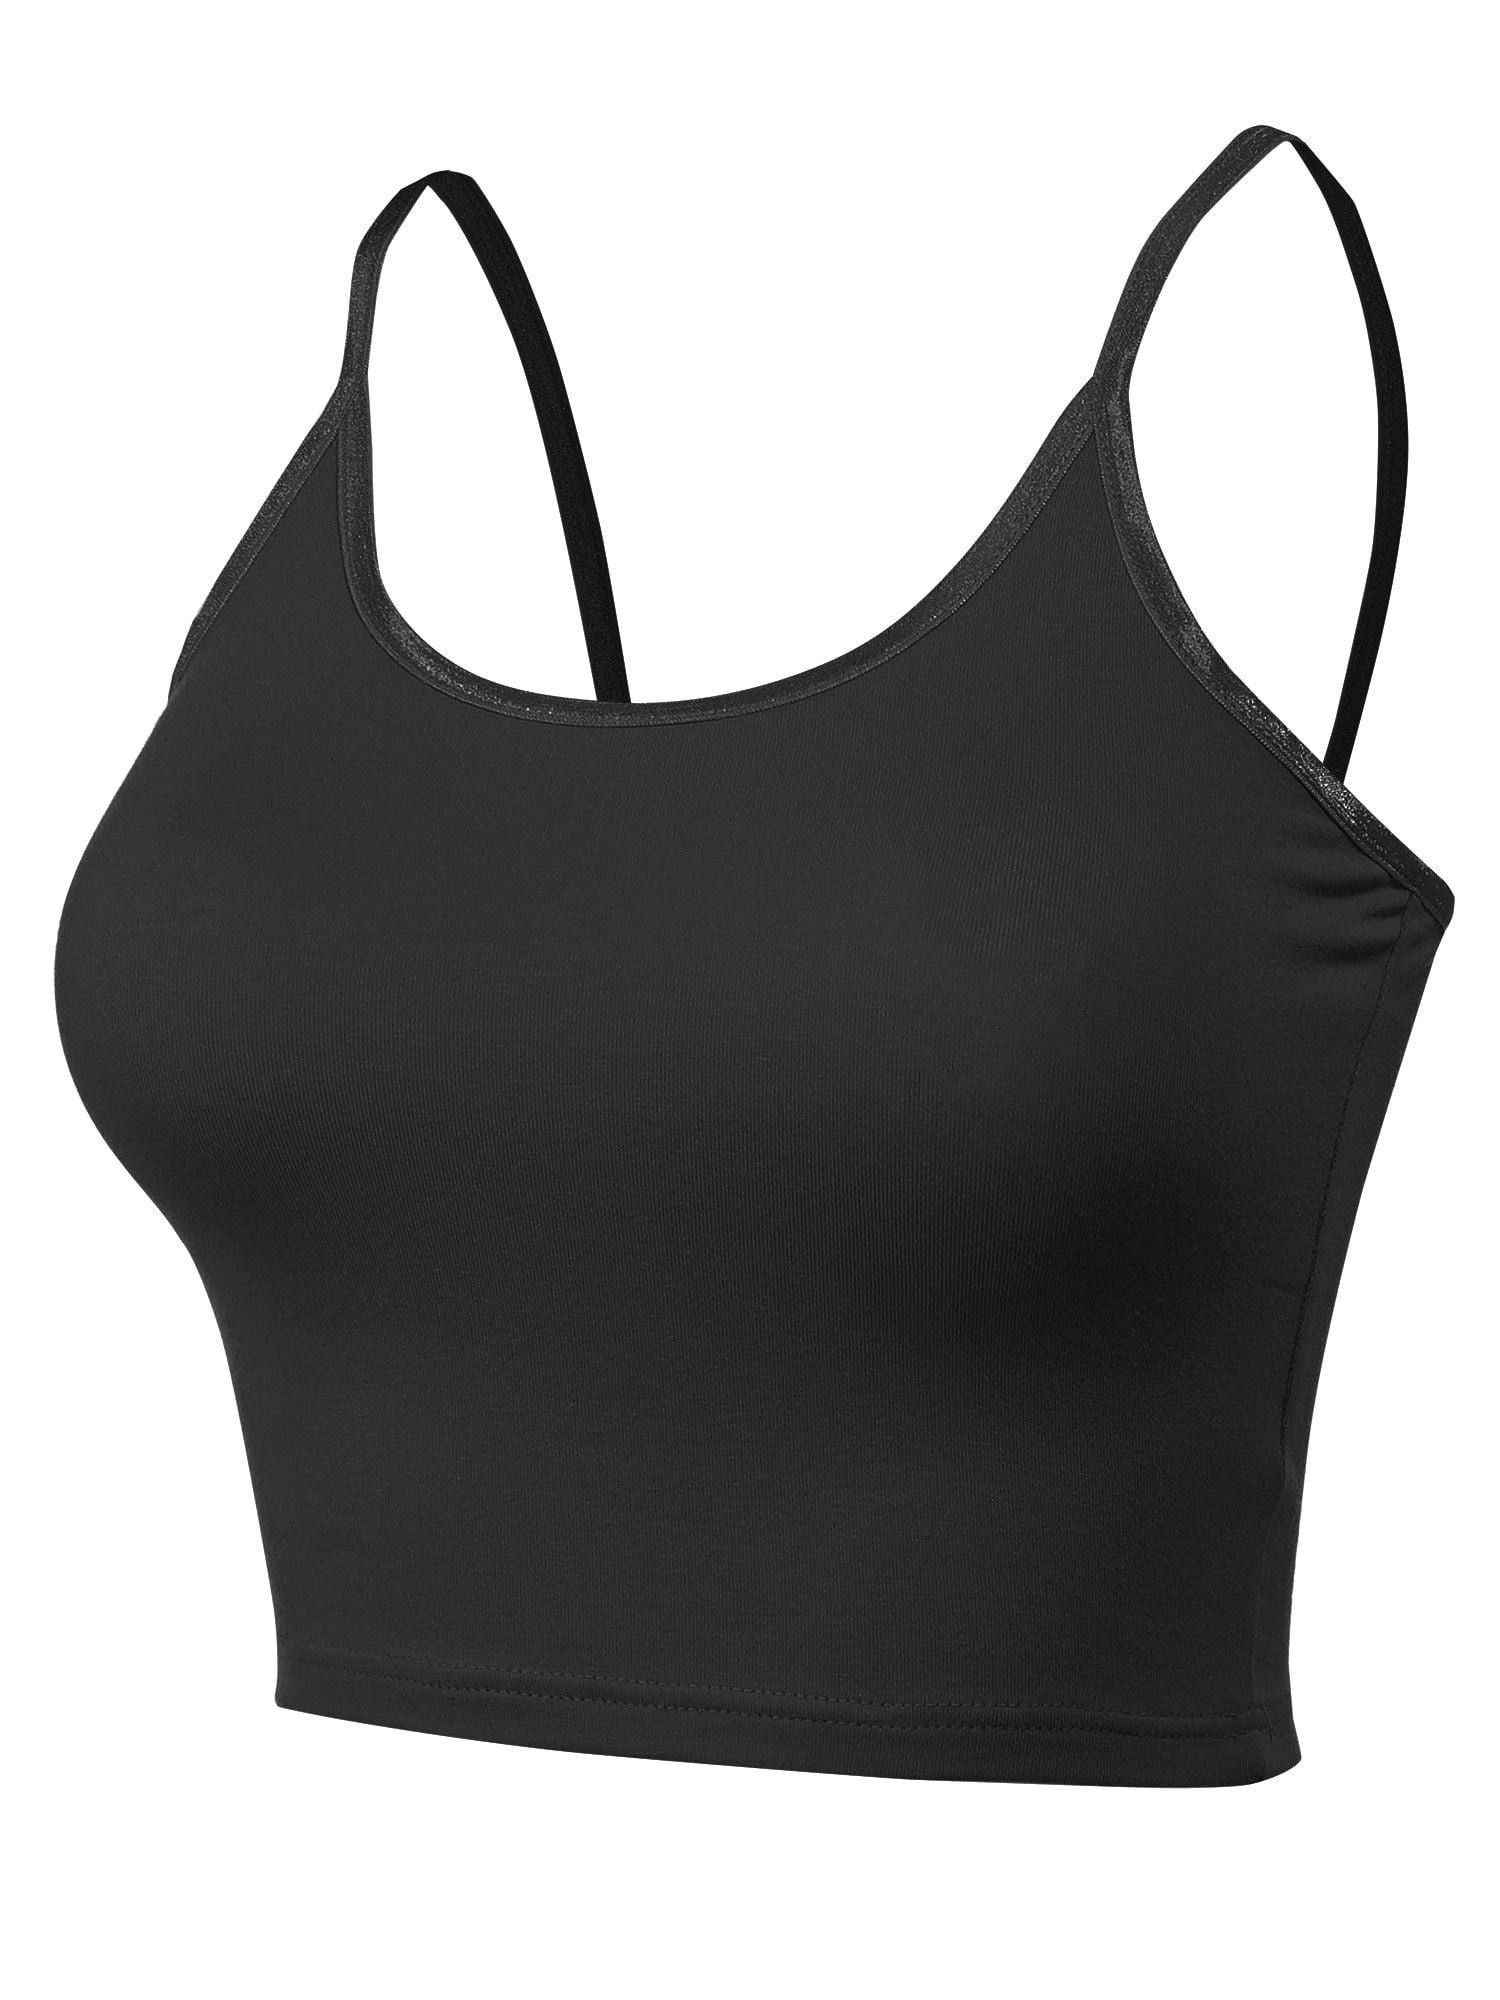 FashionMille Women's Scoop Neck Workout and Training Basic Sleeveless Racerback Crop Sports Active Camis Tanks Top